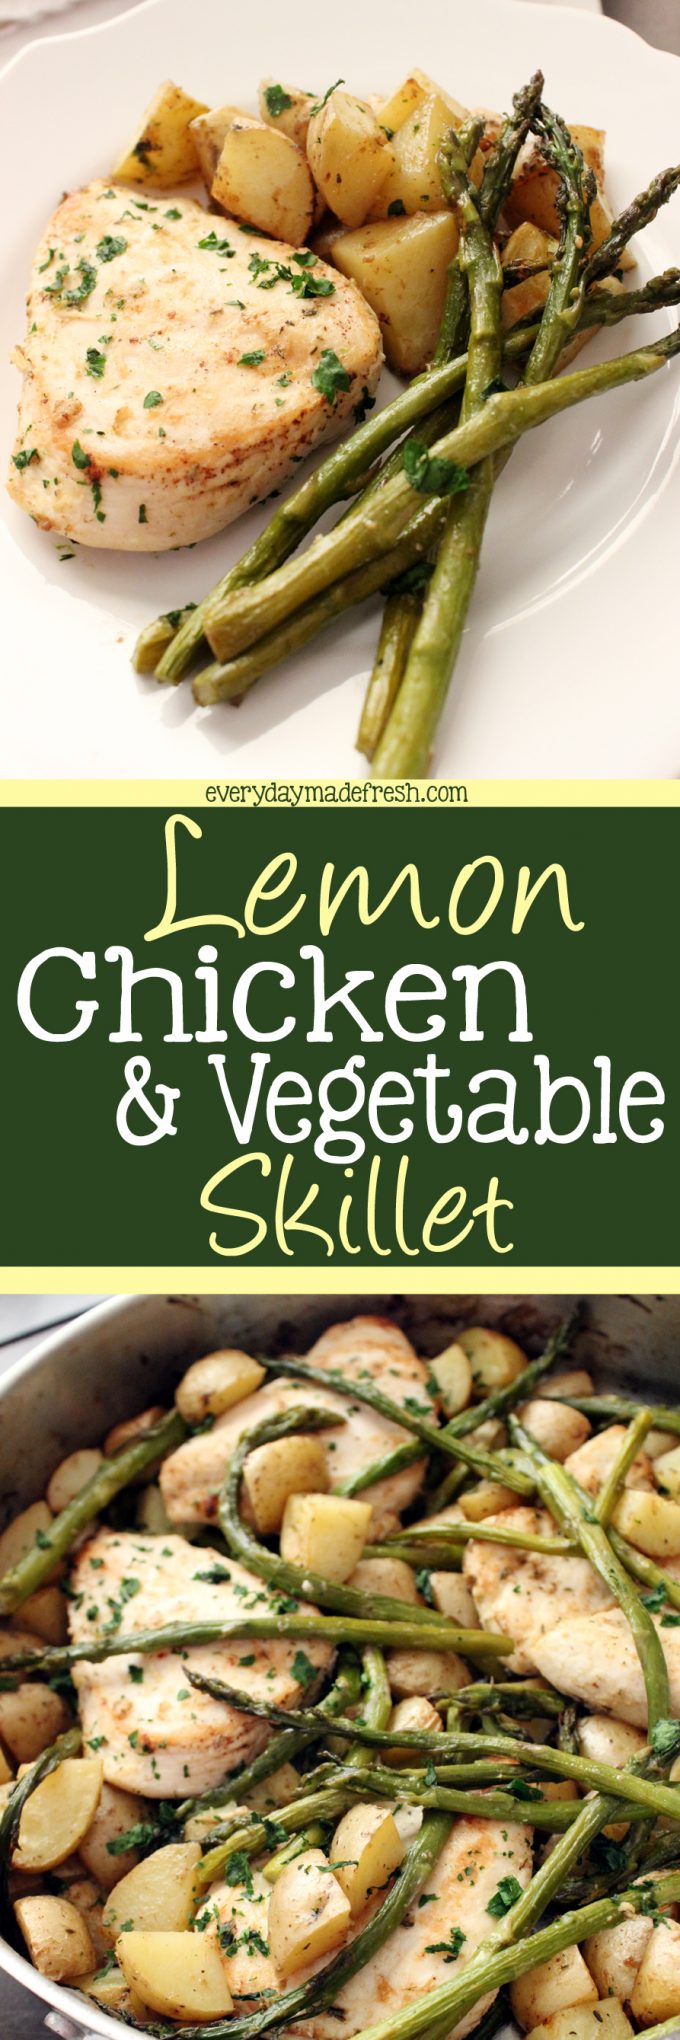 Need a quick and easy dinner recipe? One that has meat, vegetable, and starch? This Lemon Chicken & Vegetable Skillet is the answer! | EverydayMadeFresh.com